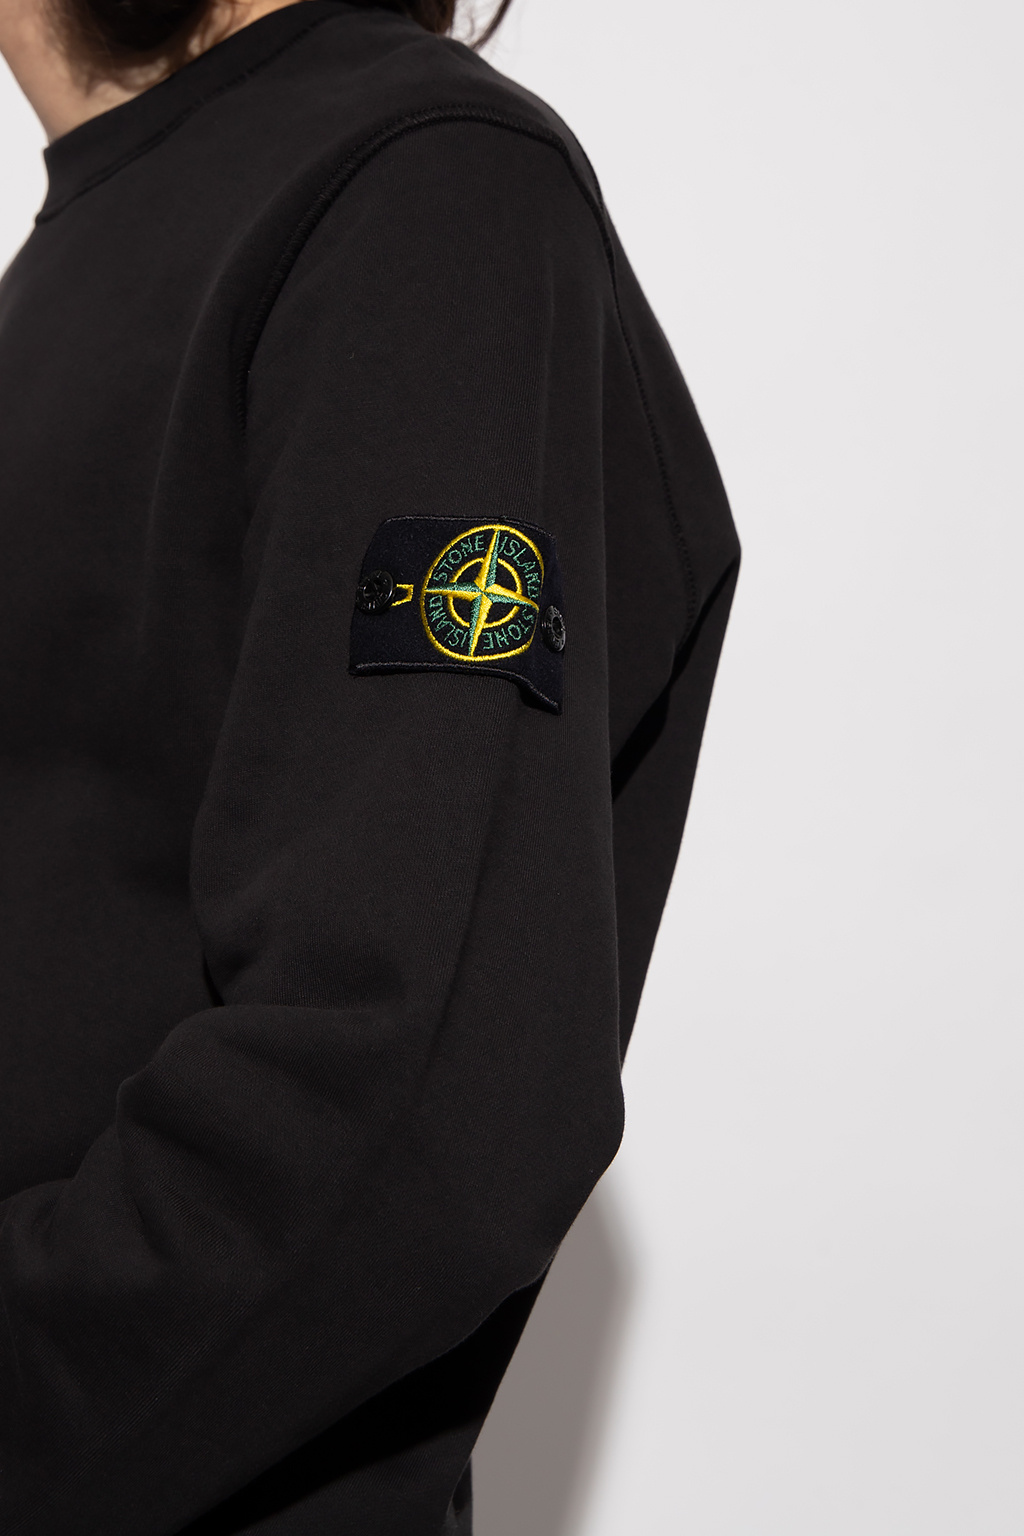 Stone Island and sweatshirts round out the mens offerings